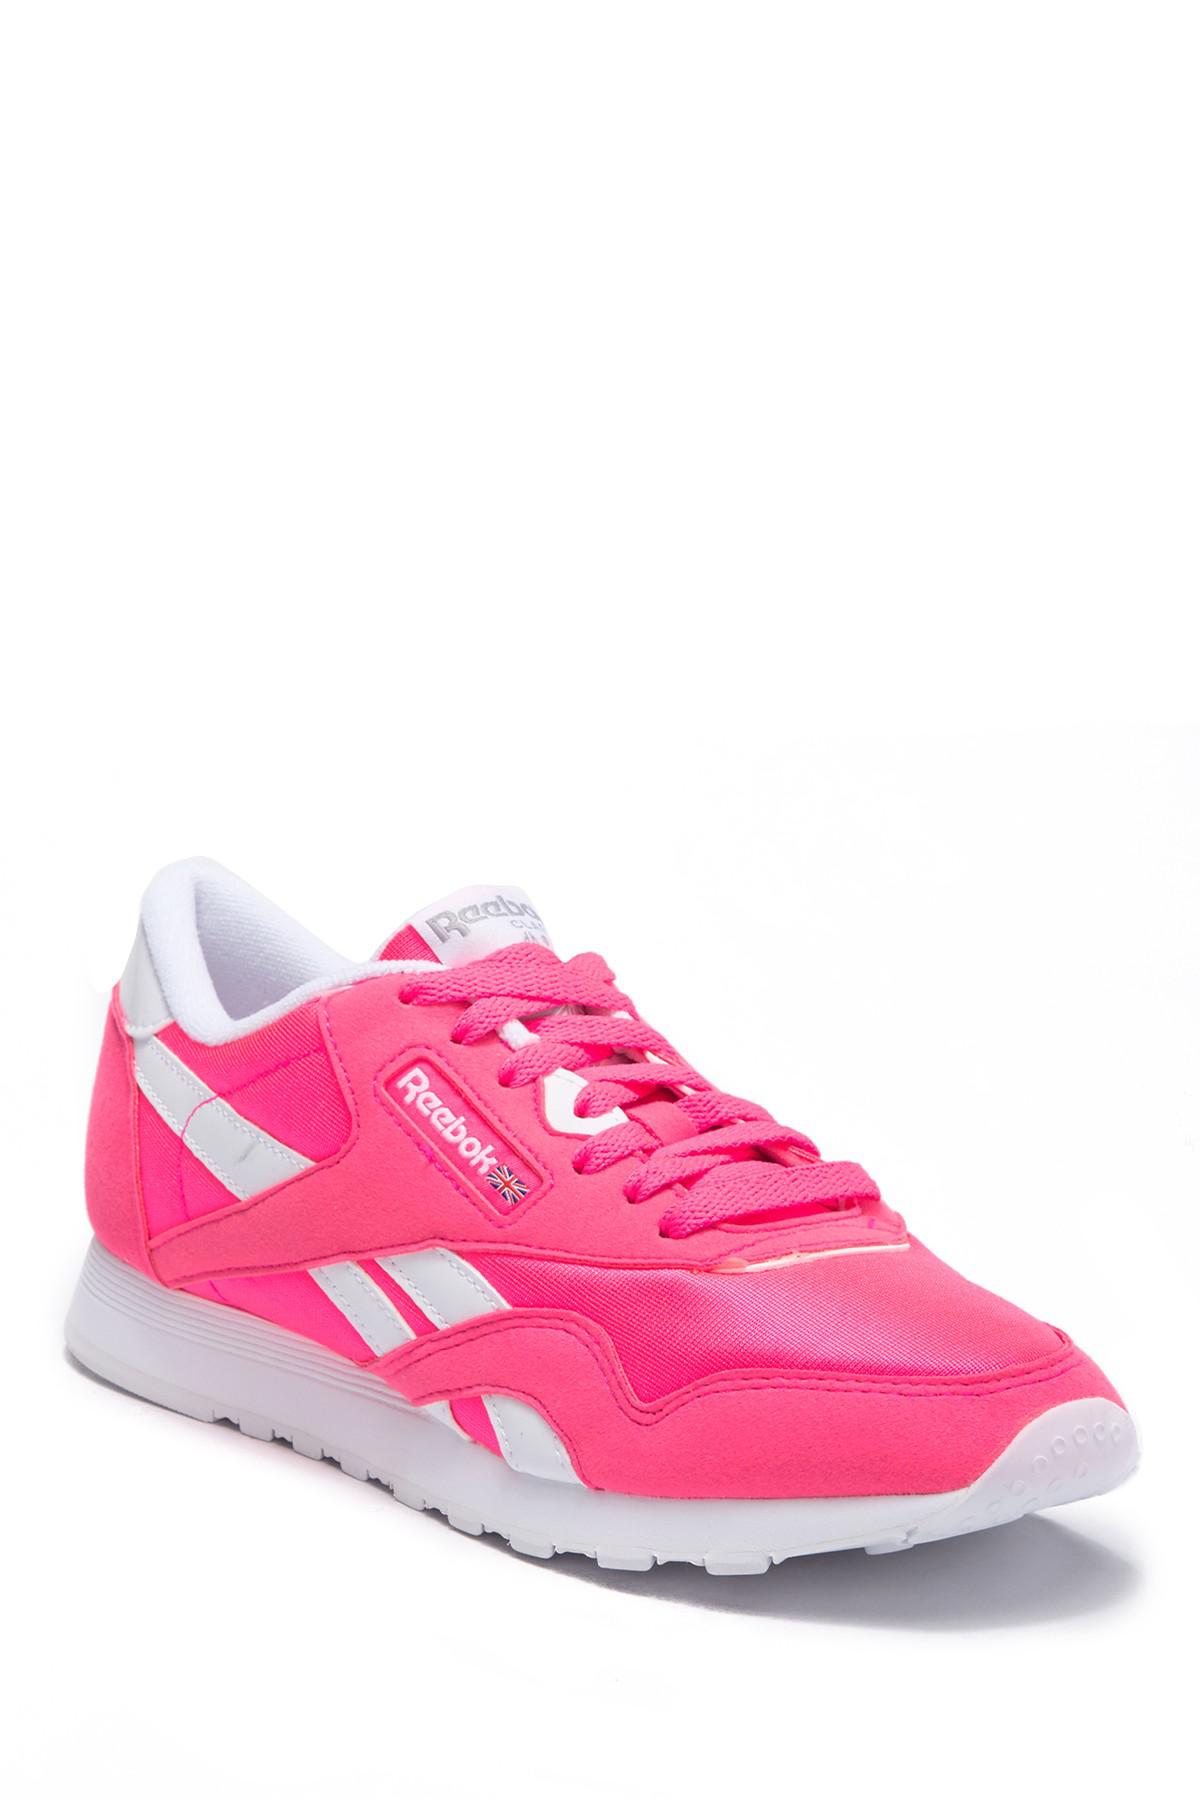 Reebok Synthetic Cl Nylon Brights Sneaker in Acid Pink/White (Pink) | Lyst